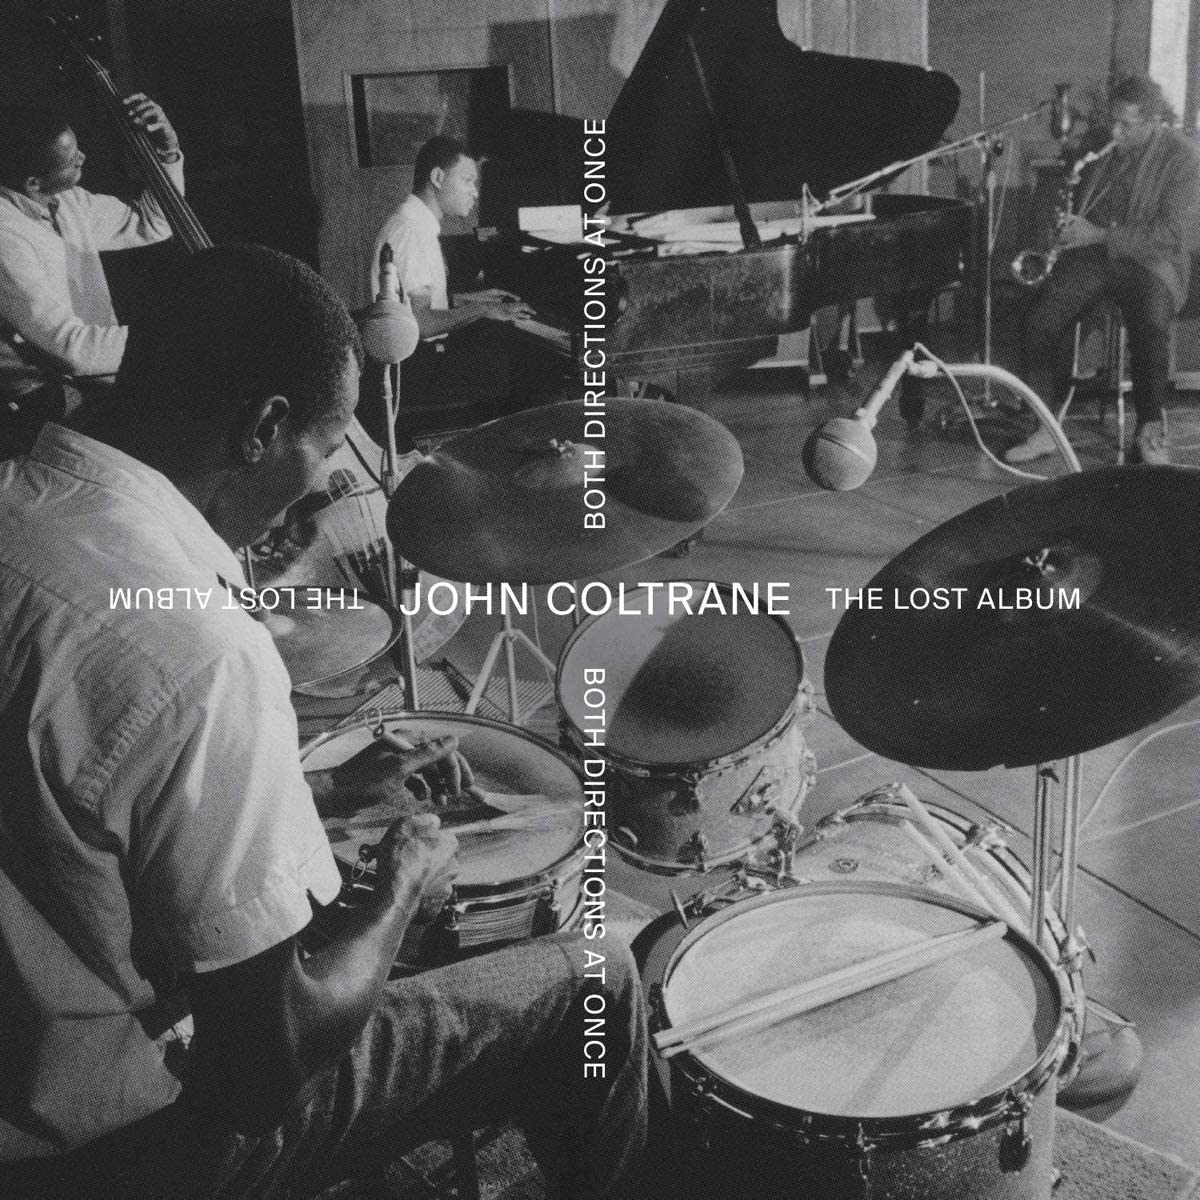 John Coltrane Both Directions At Once